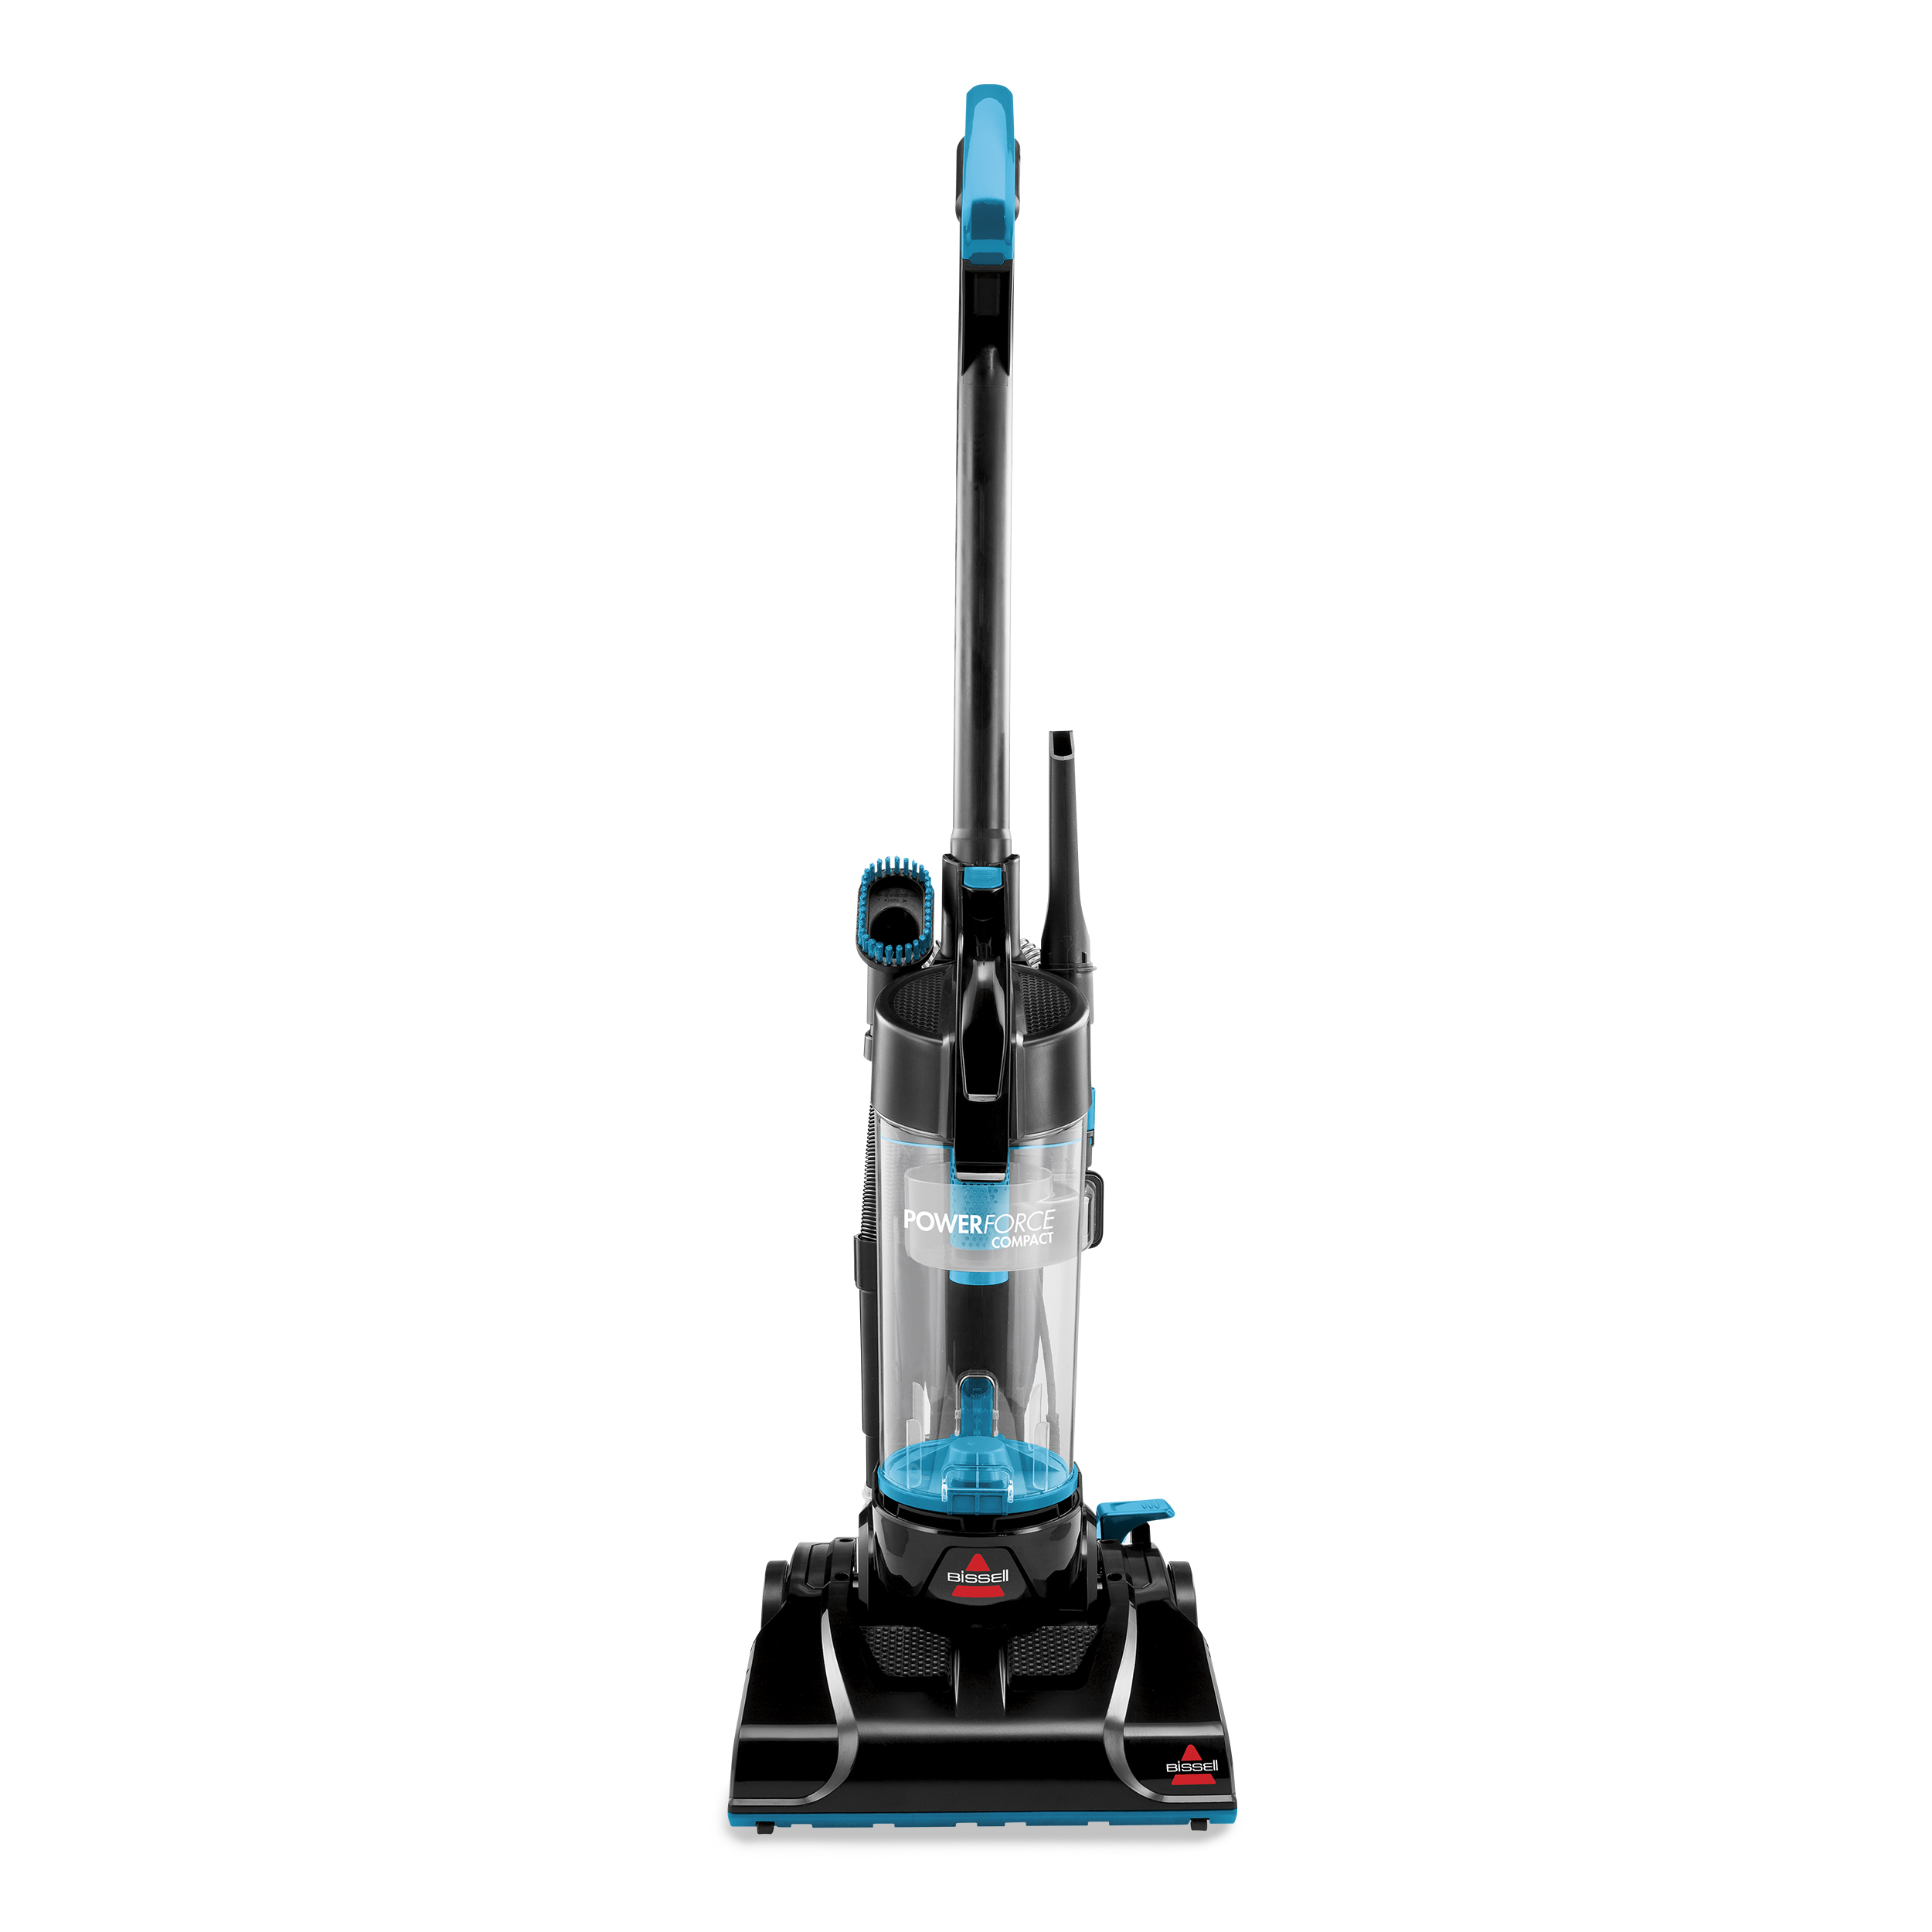 BISSELL Power Force Compact Bagless Vacuum, 2112 - image 9 of 9